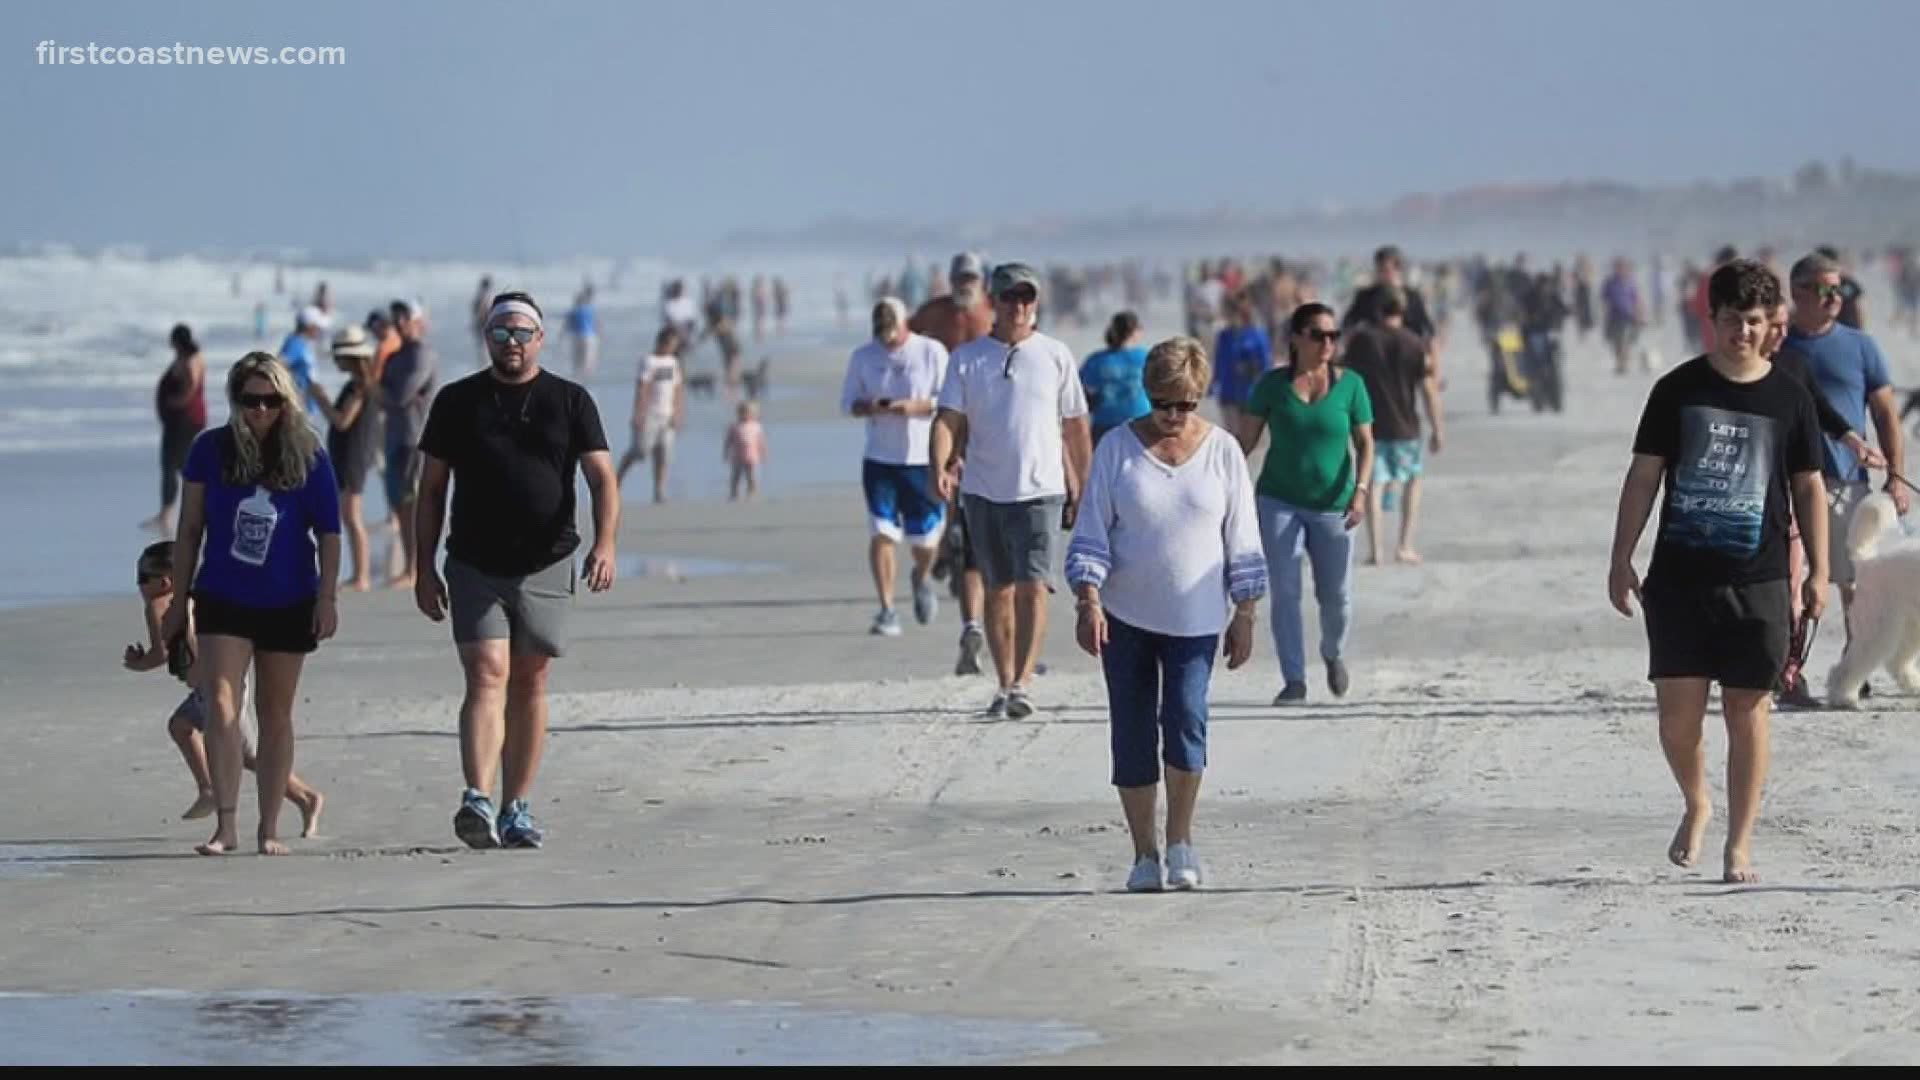 Are the photos, videos circulating of Duval County beaches real?